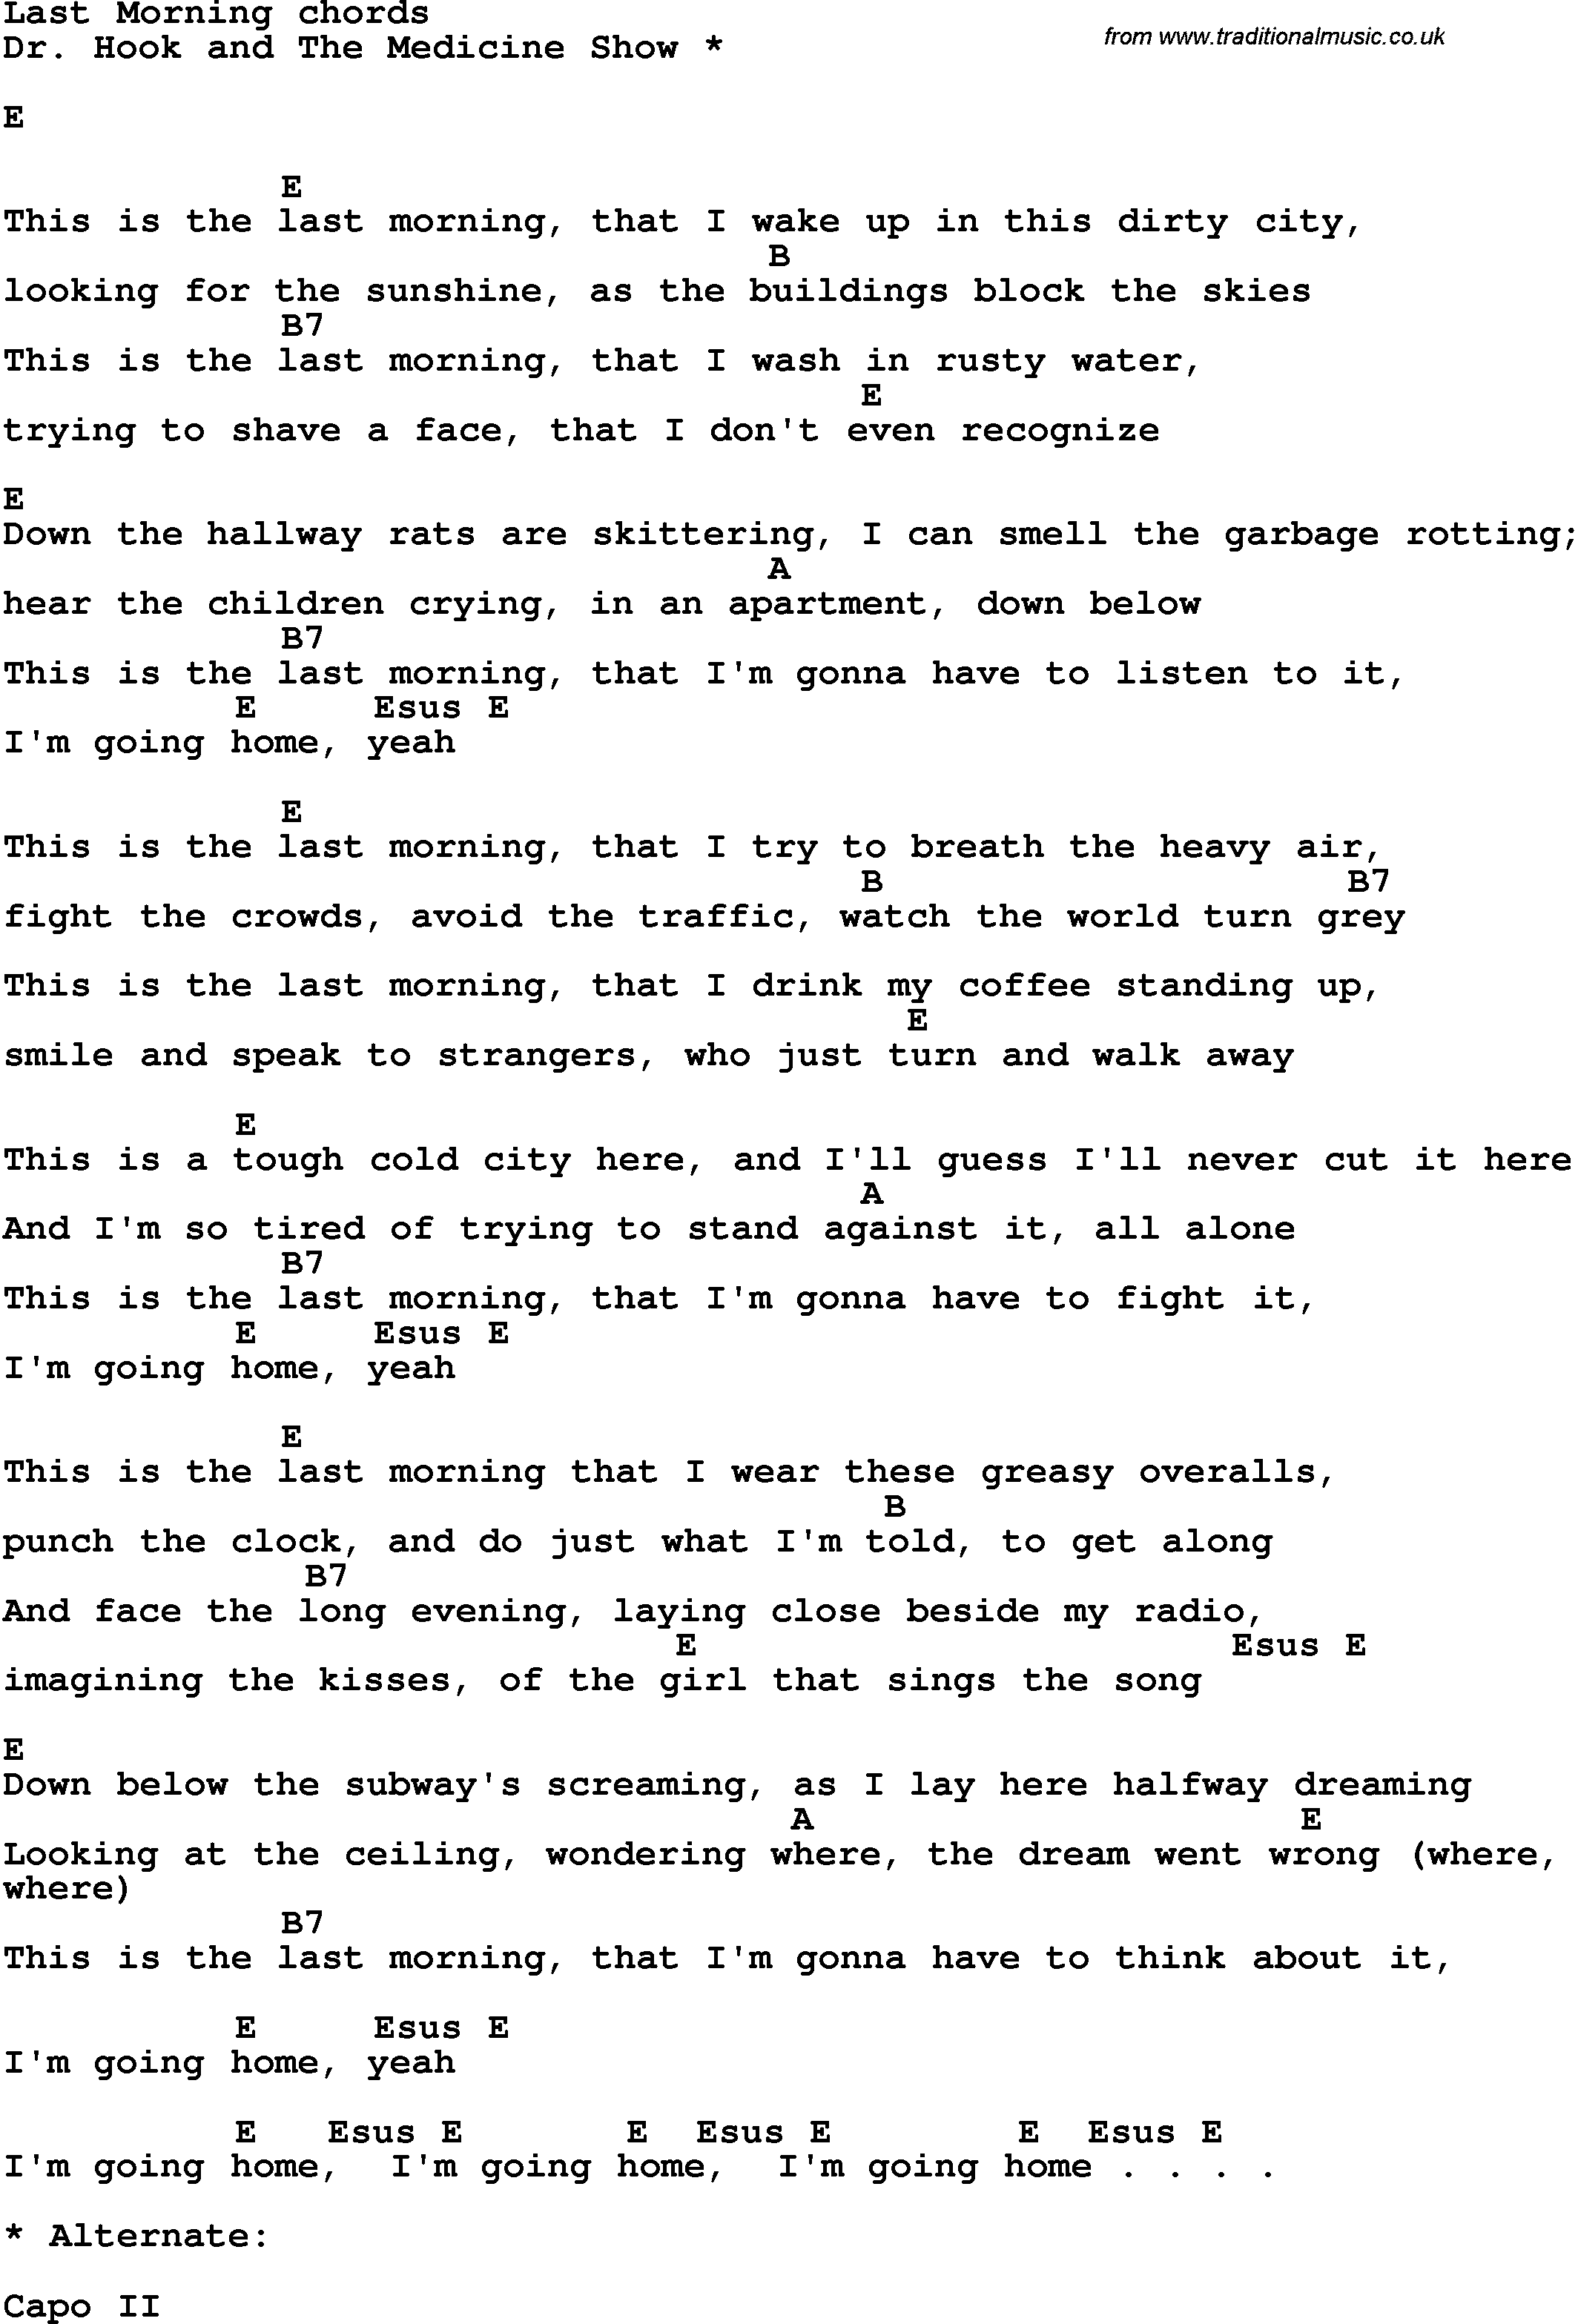 Song lyrics with guitar chords for Last Morning